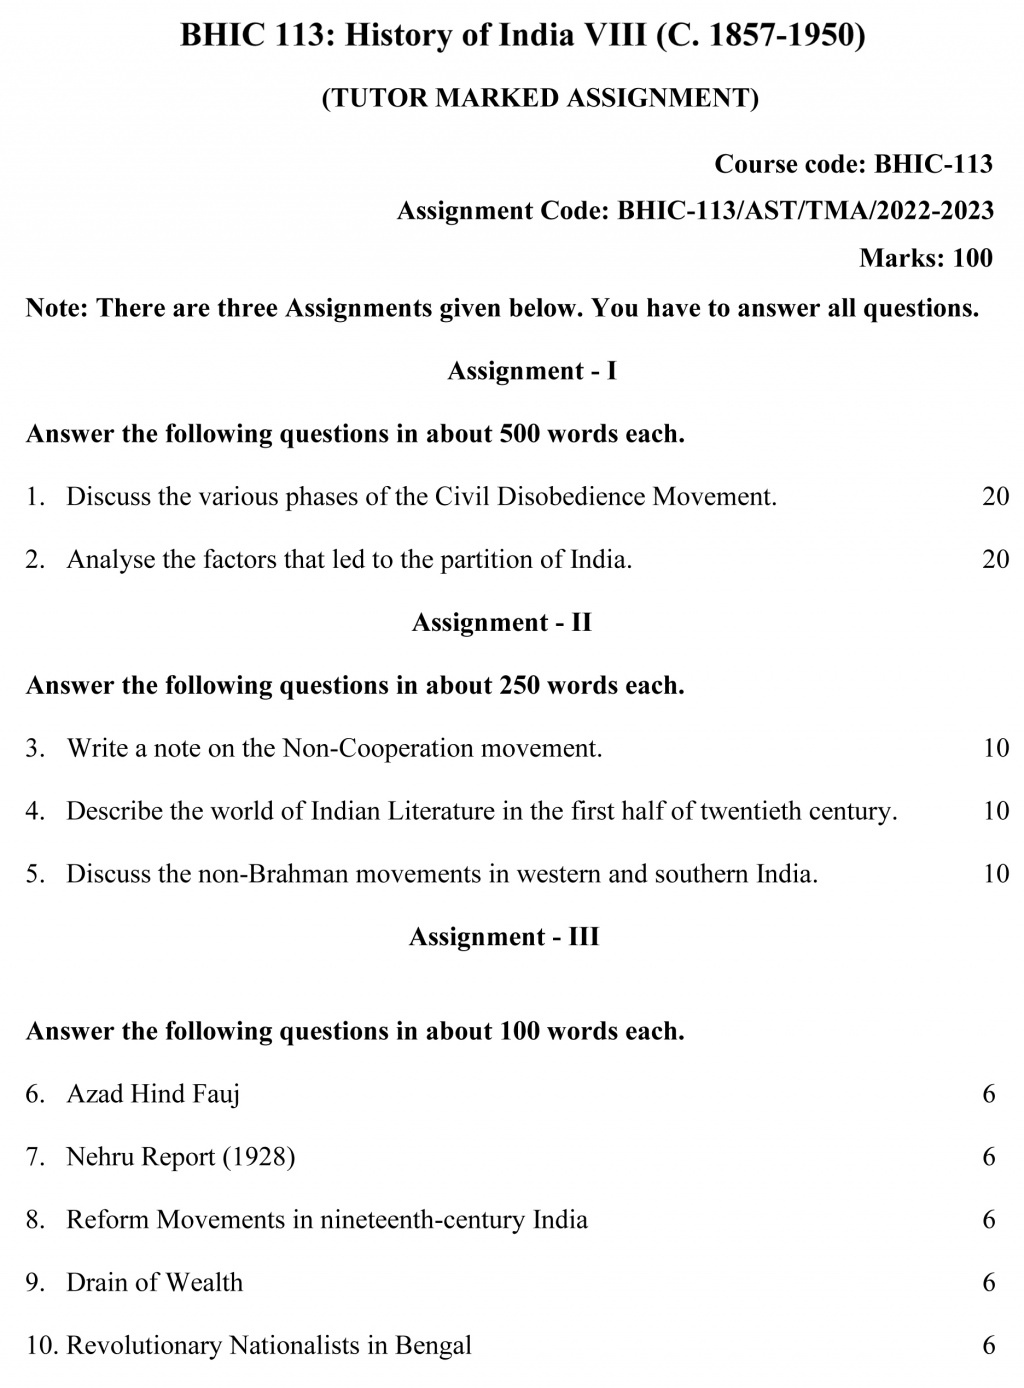 IGNOU BHIC-113 - History of India –VIII (c. 1857 – 1950) Latest Solved Assignment-July 2022 – January 2023